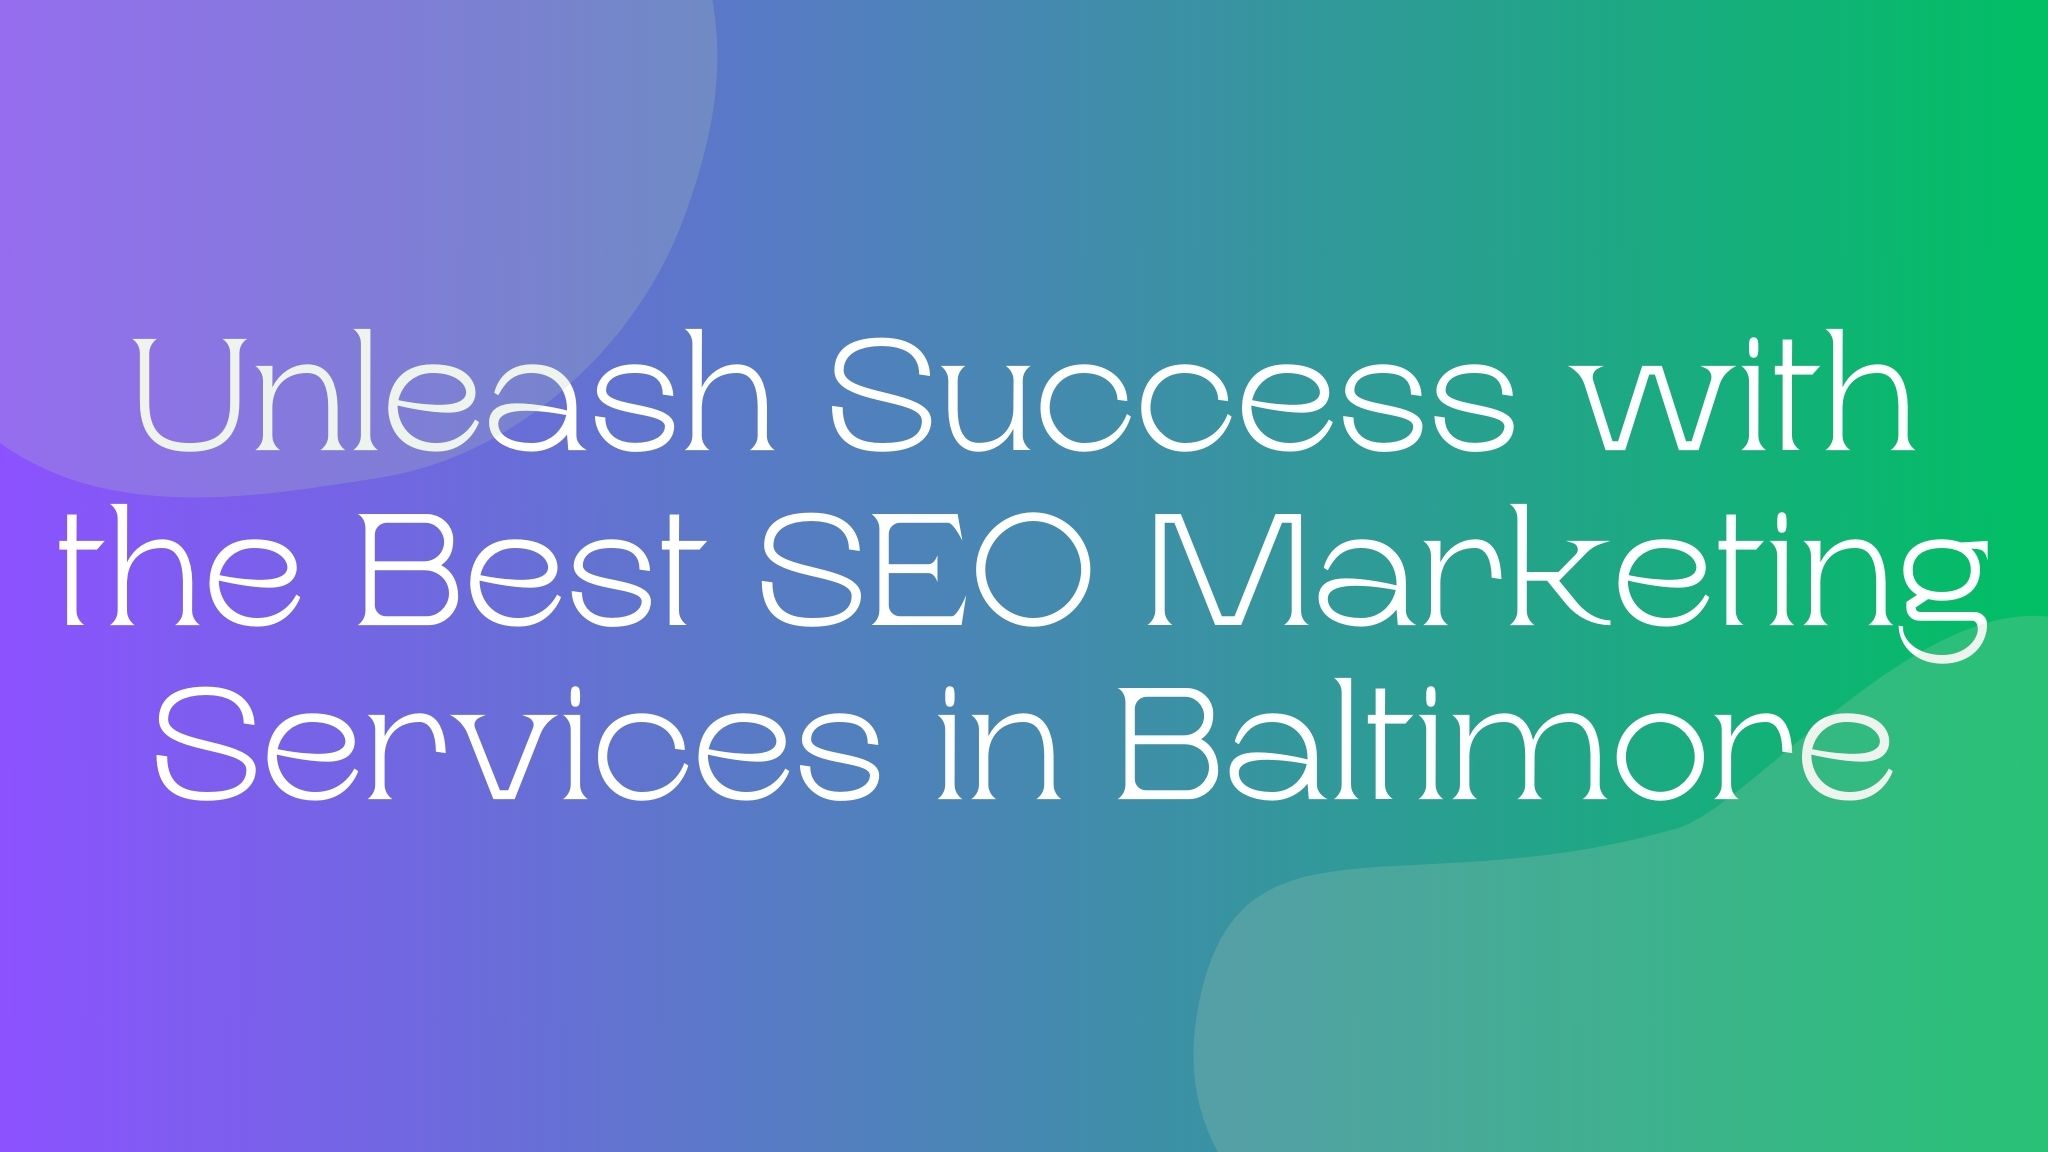 Unleash Success with the Best SEO Marketing Services in Baltimore